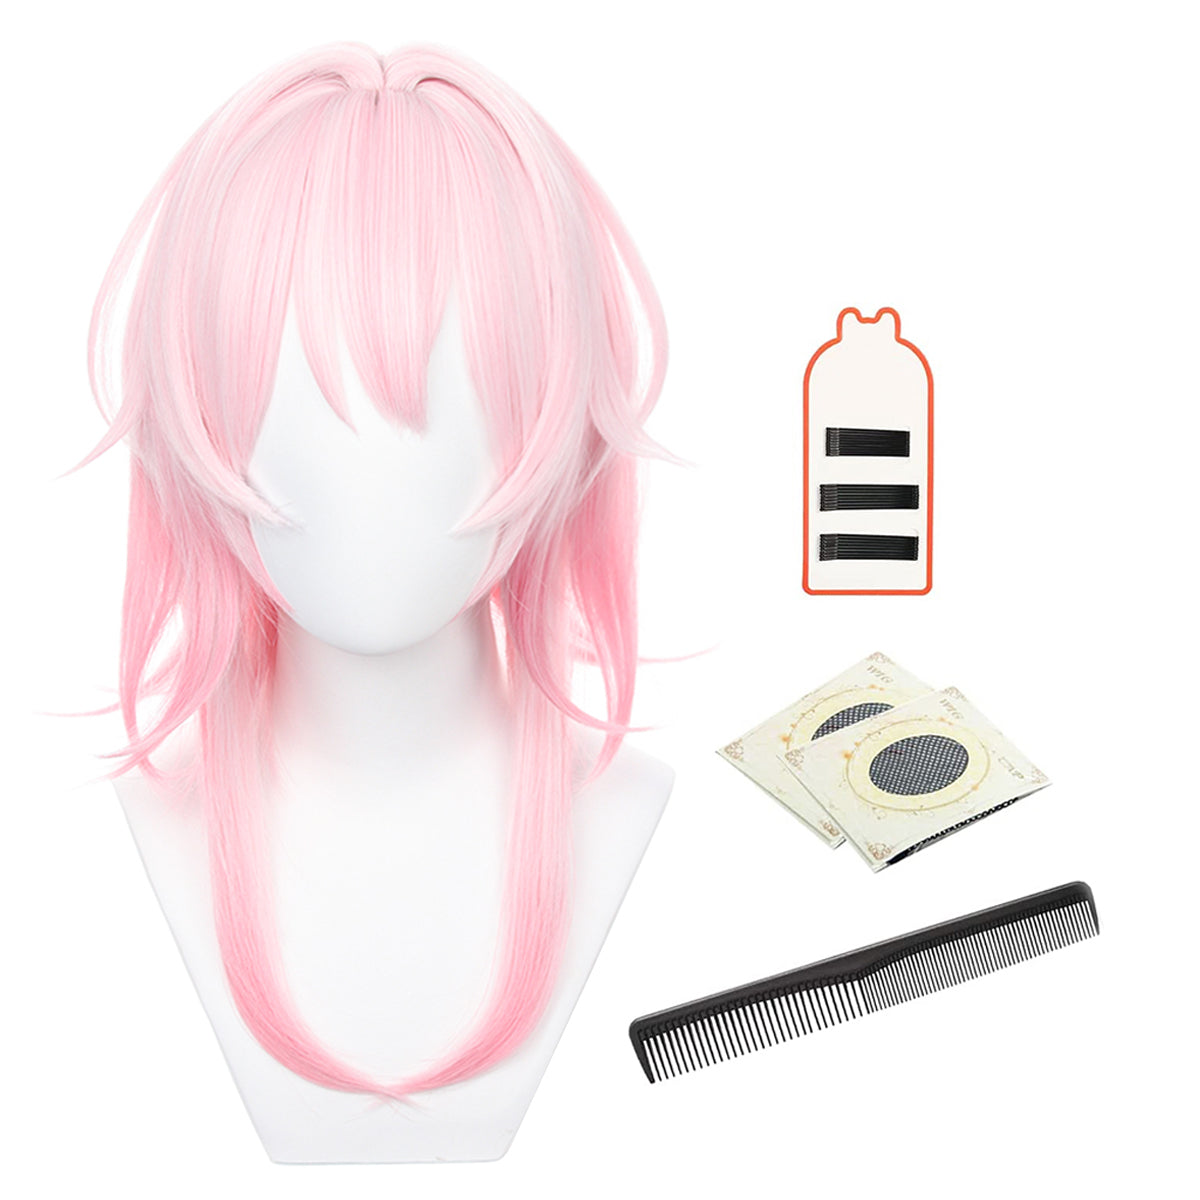 HOLOUN Honkai Star Rail Game March 7th Cosplay Wig Rose Net Heat Resistant Synthetic Fiber Comb Hairpin Adjustable Halloween